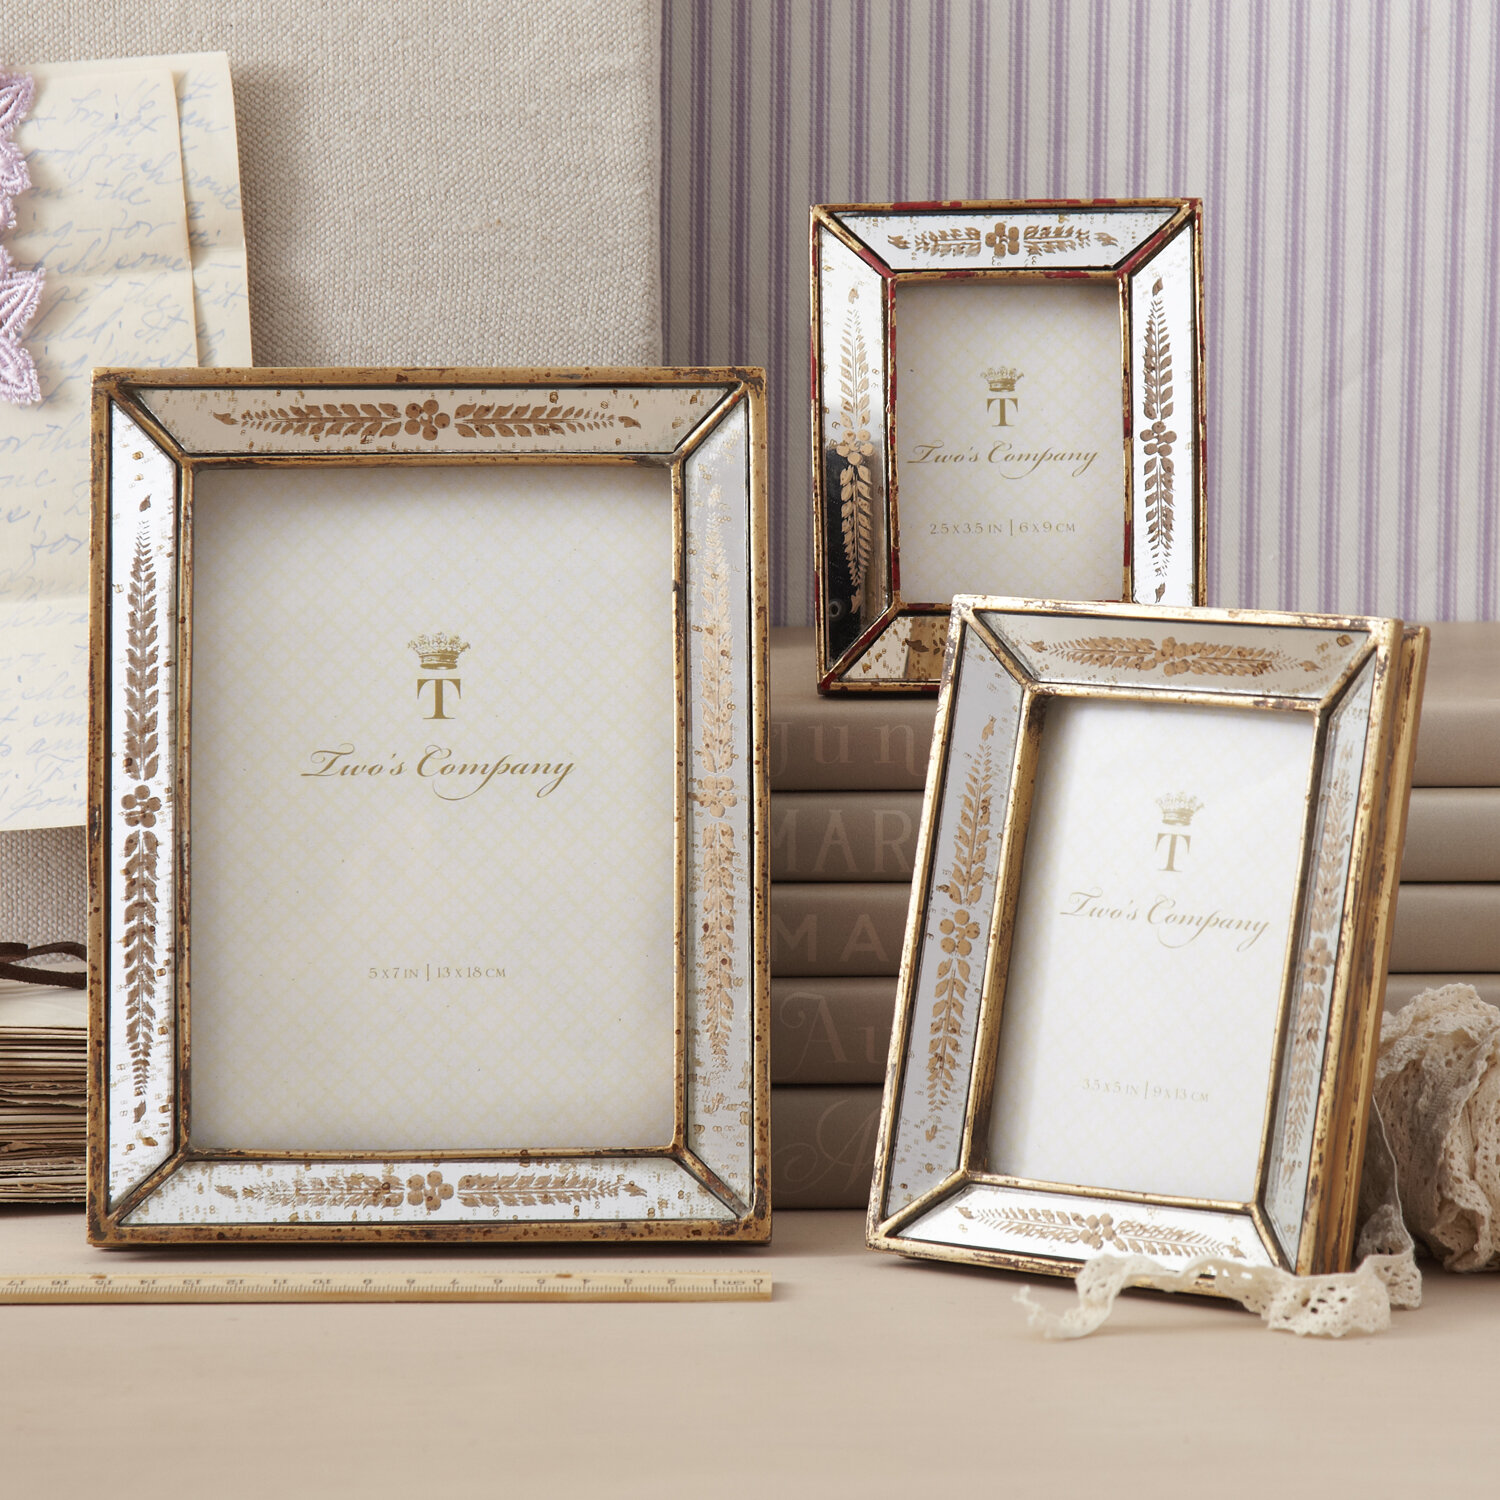 PICTURE FRAMES FOR PHOTOS 3.5" X 5" DIFFERENT STYLES AND SIZES 